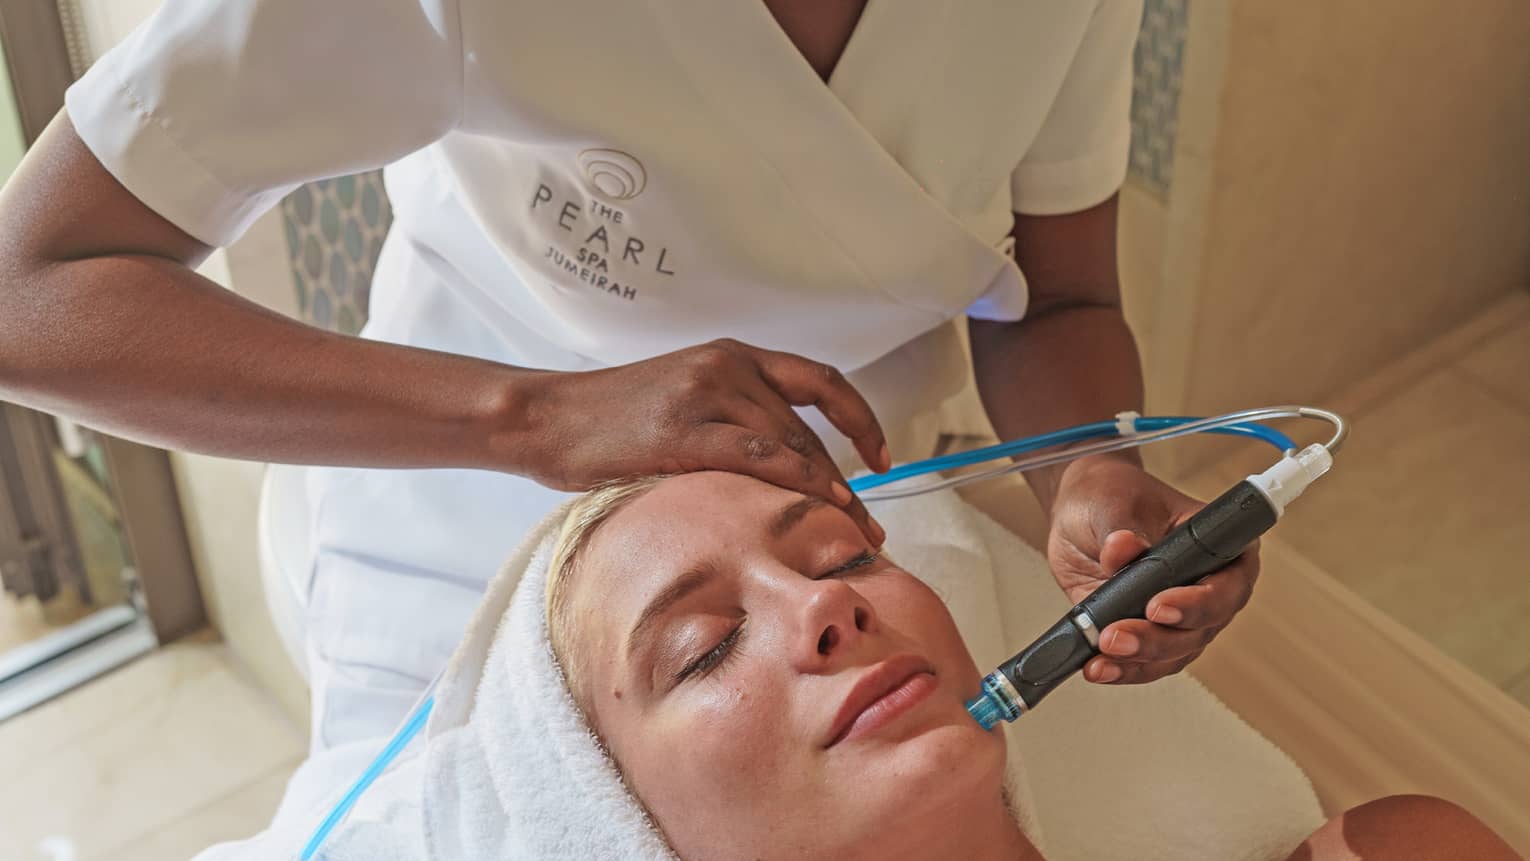 Spa staff holds a blue and black facial tool over woman's face as she lays on massage bed 